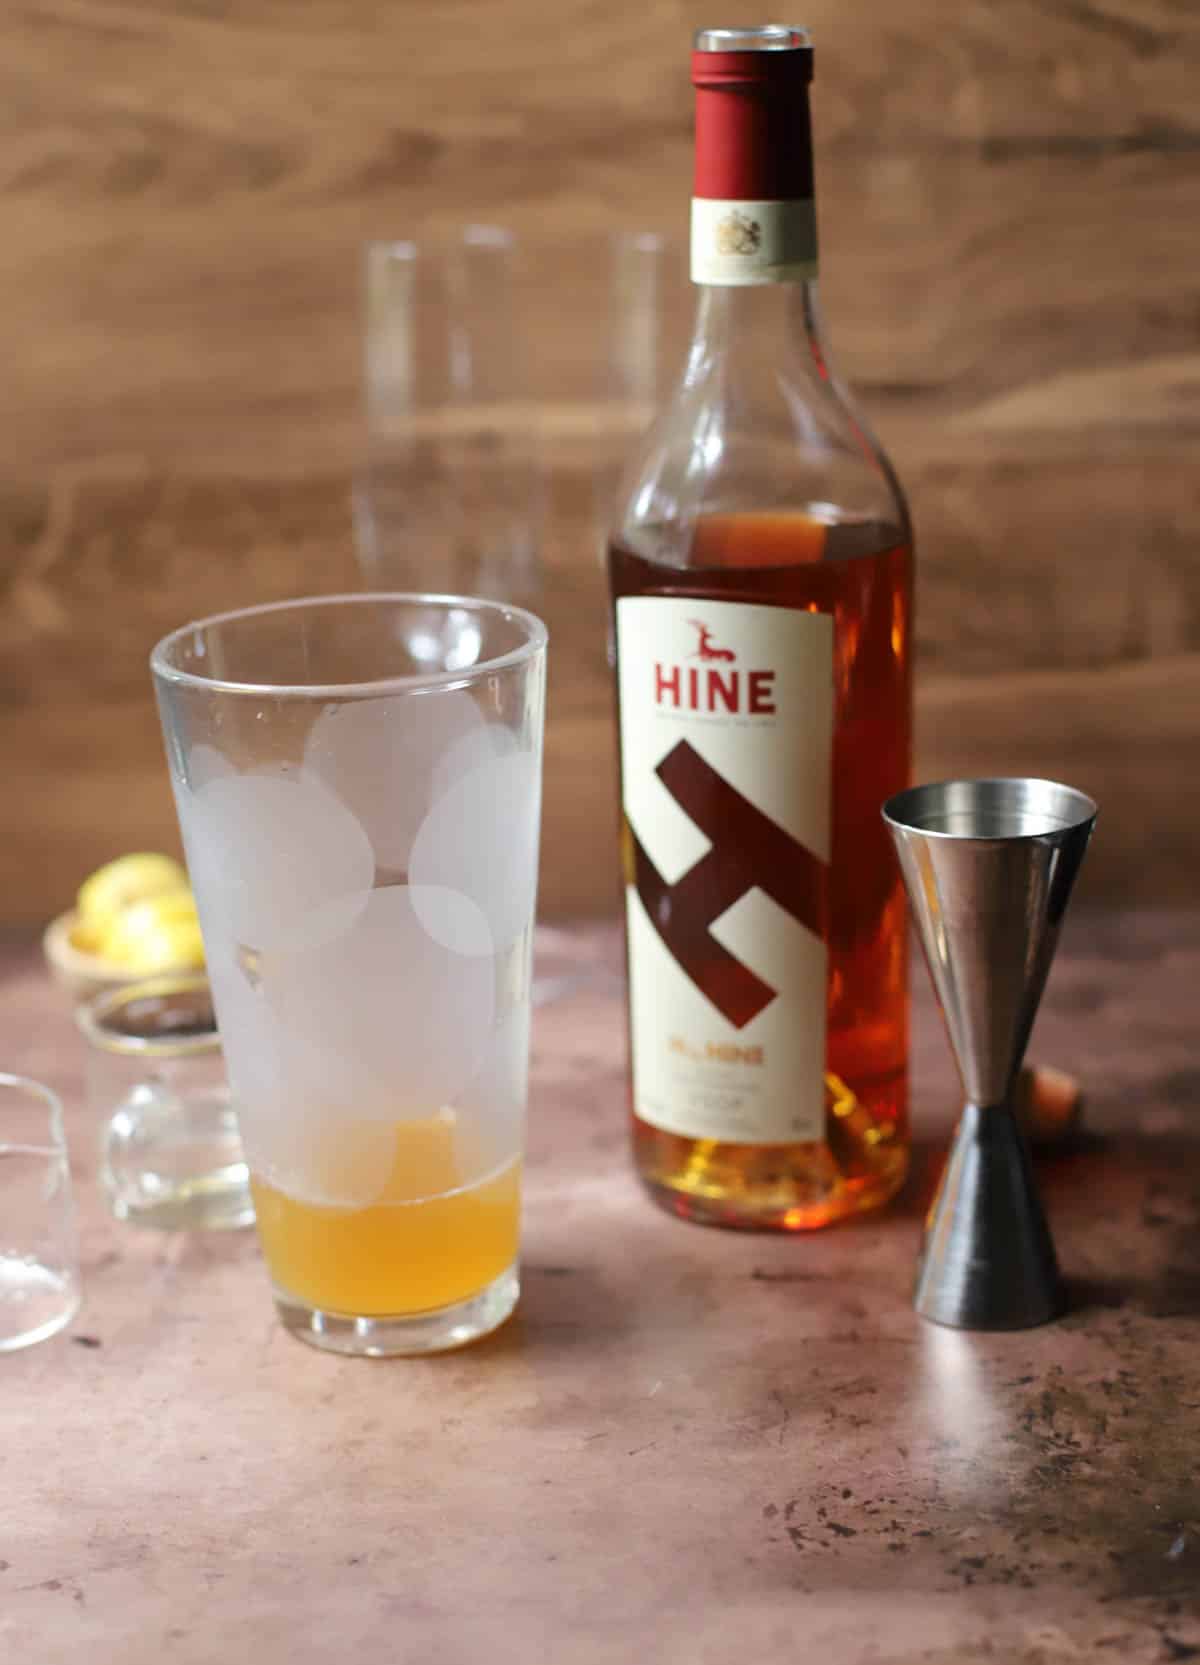 Cocktail shaker glass with cognac, lemon juice, and simple syrup with bottle and stainless jigger to the side.